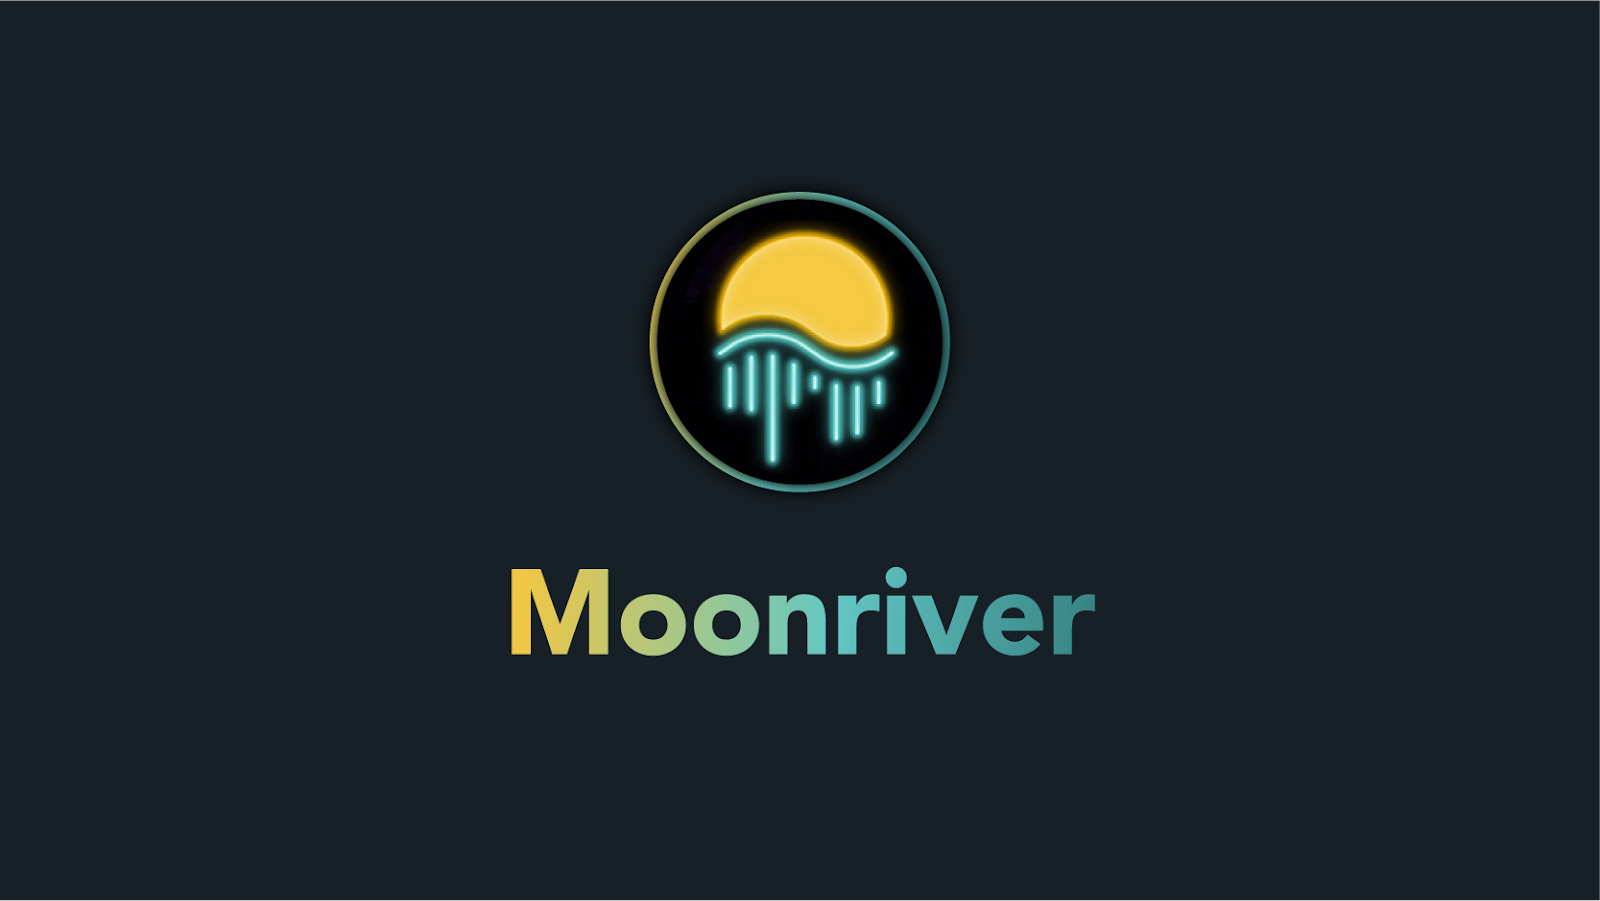 All you need to know about the moonriver network